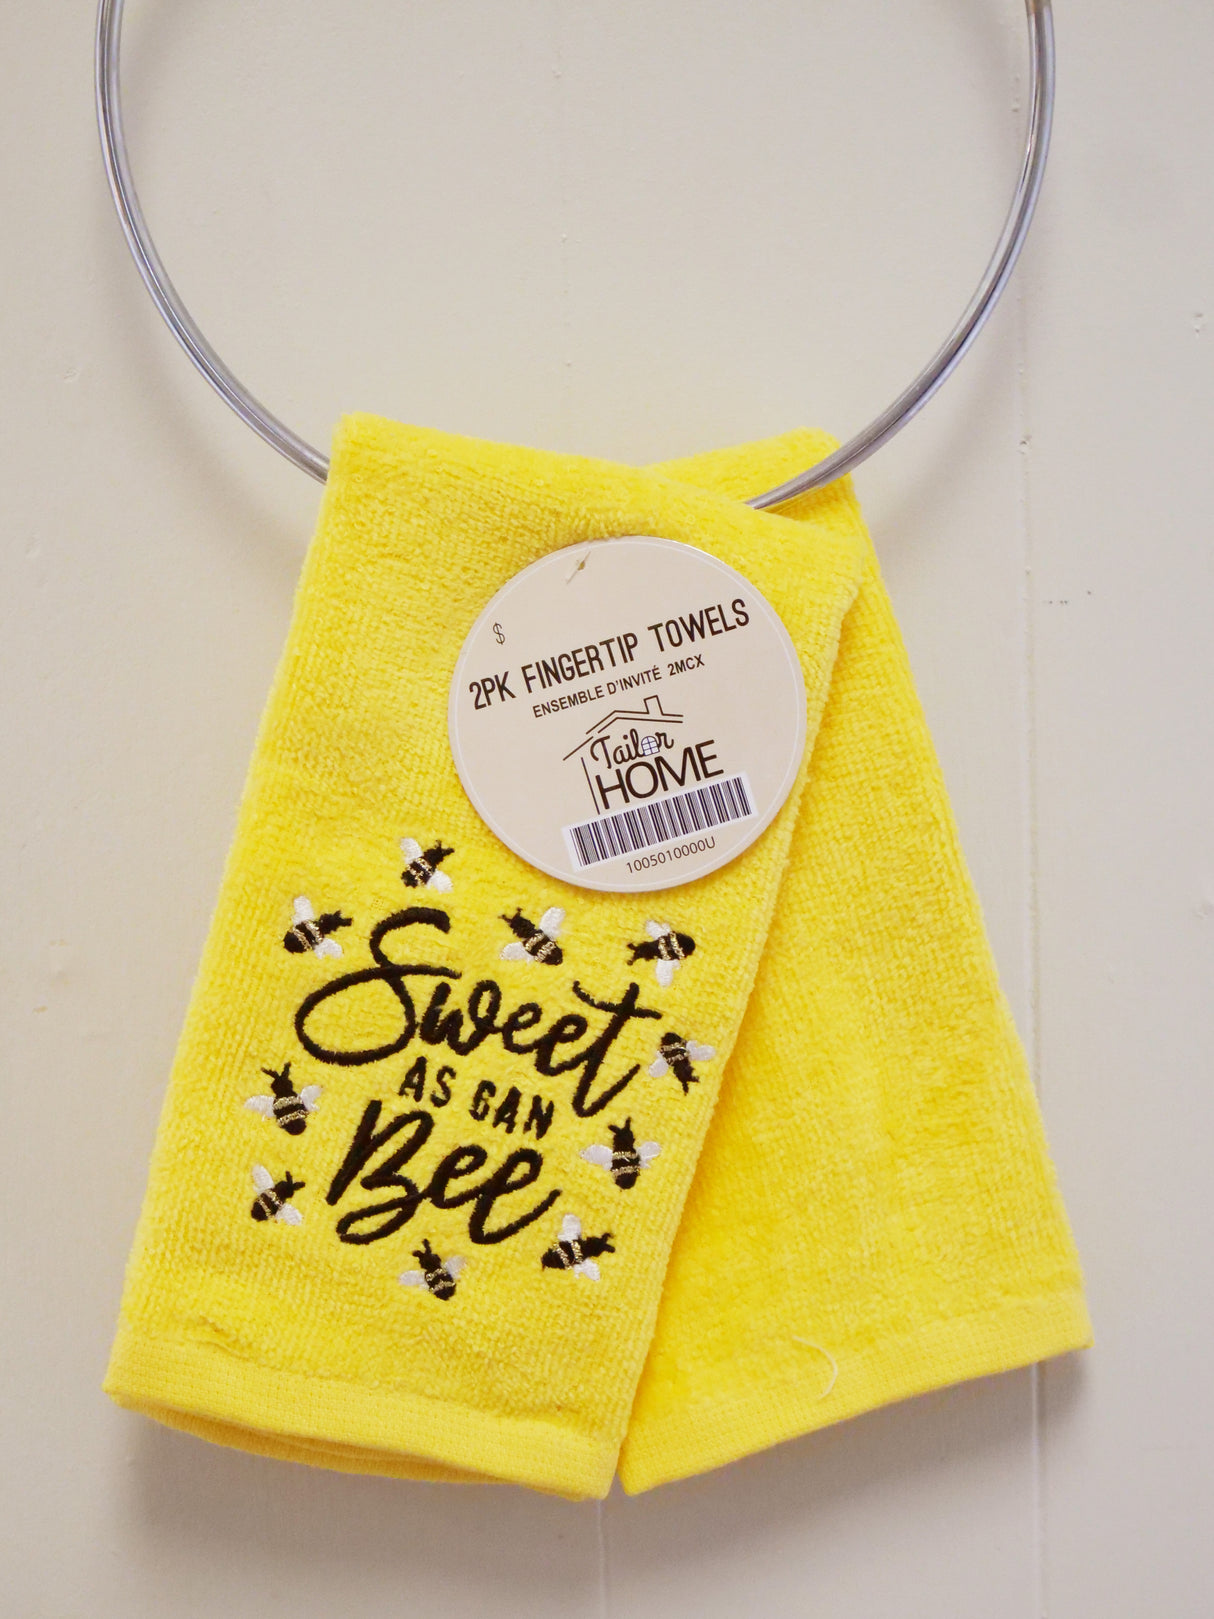 2PK FINGER TOWELS - SWEET AS CAN BEE